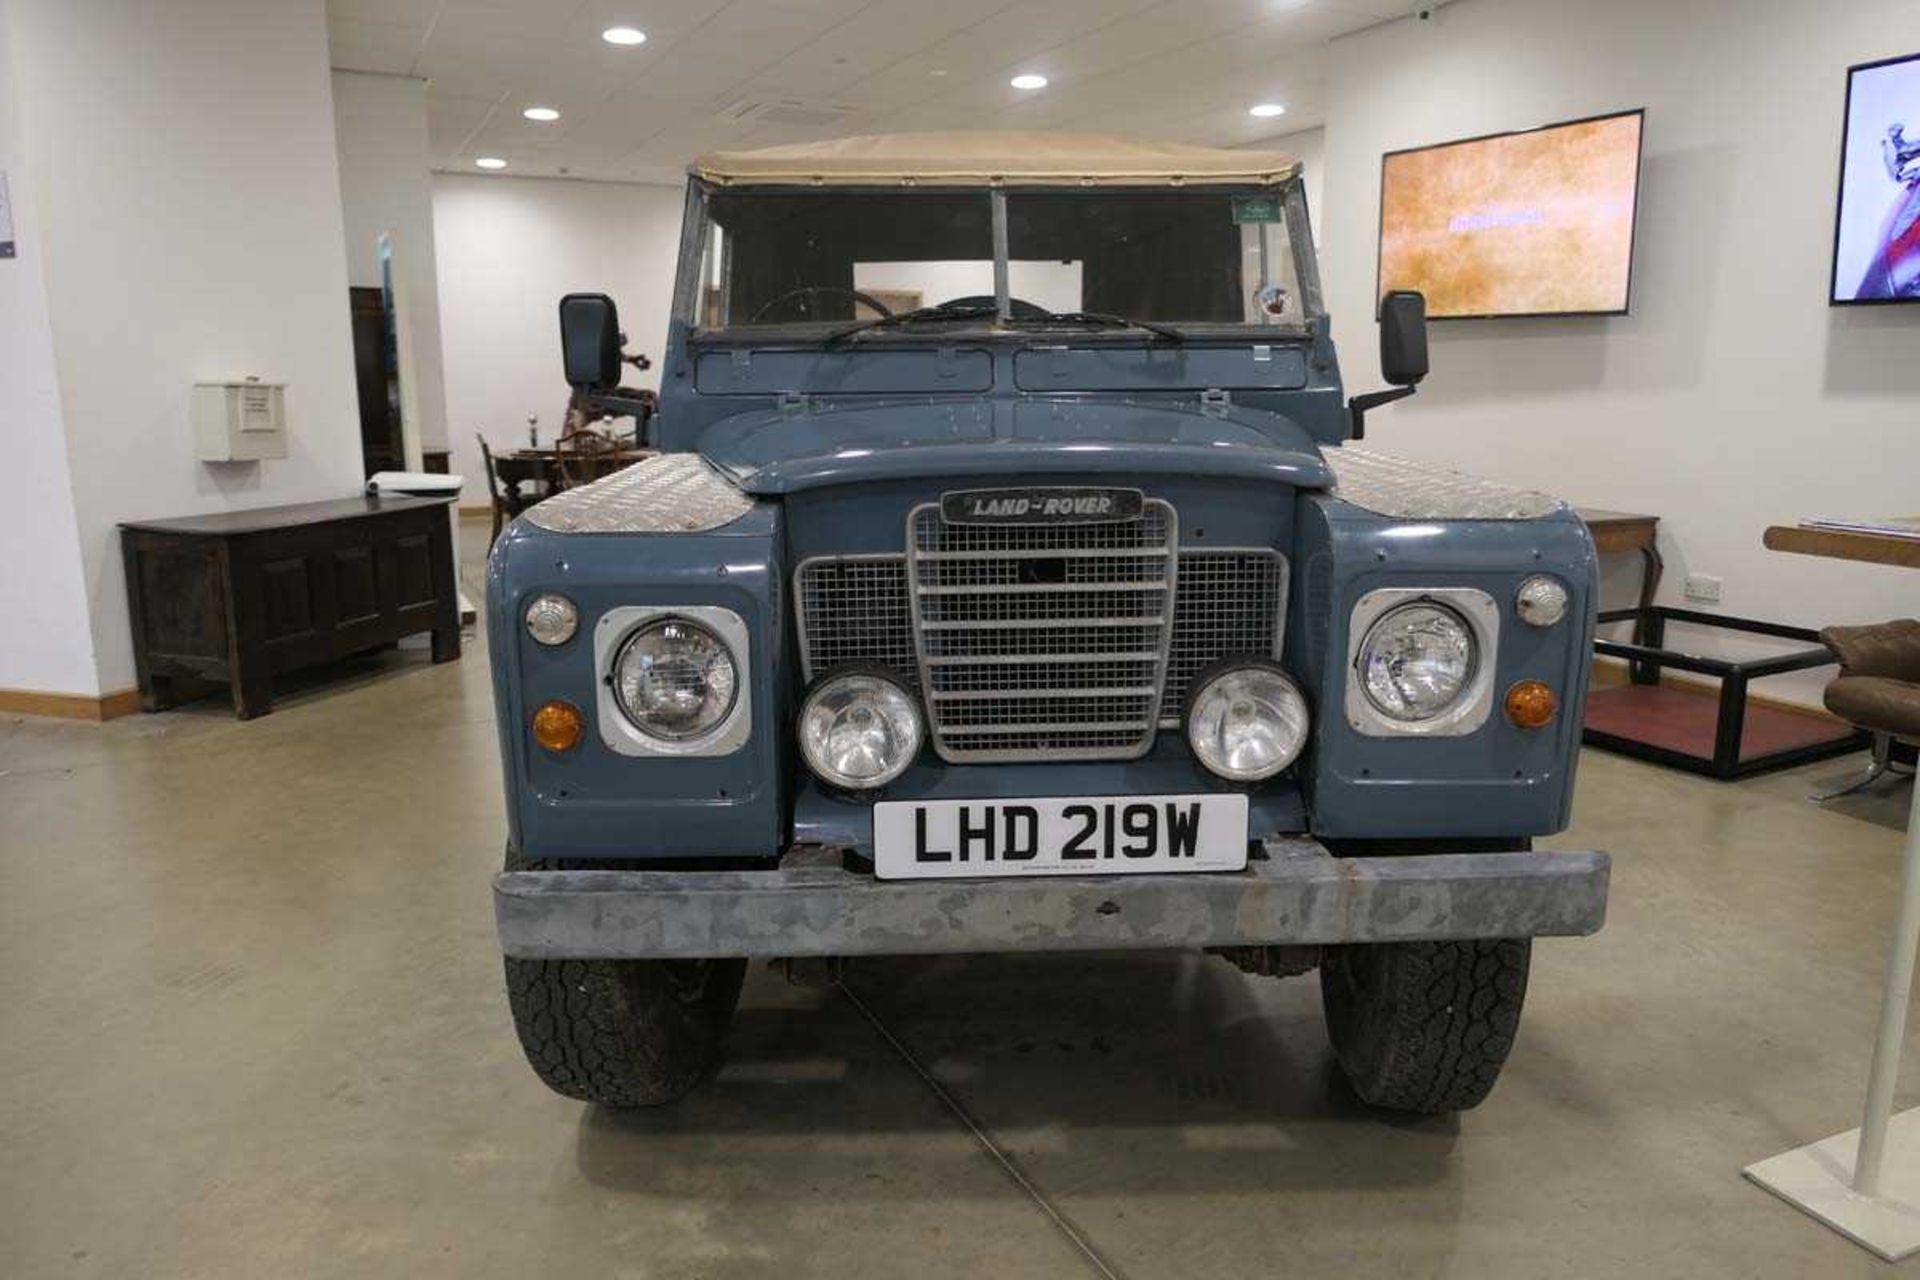 (LHD 219W) 1981 Land Rover Series 3, light 4x4 utility, 88" - 4 cyl in blue, first registered 01. - Image 2 of 17